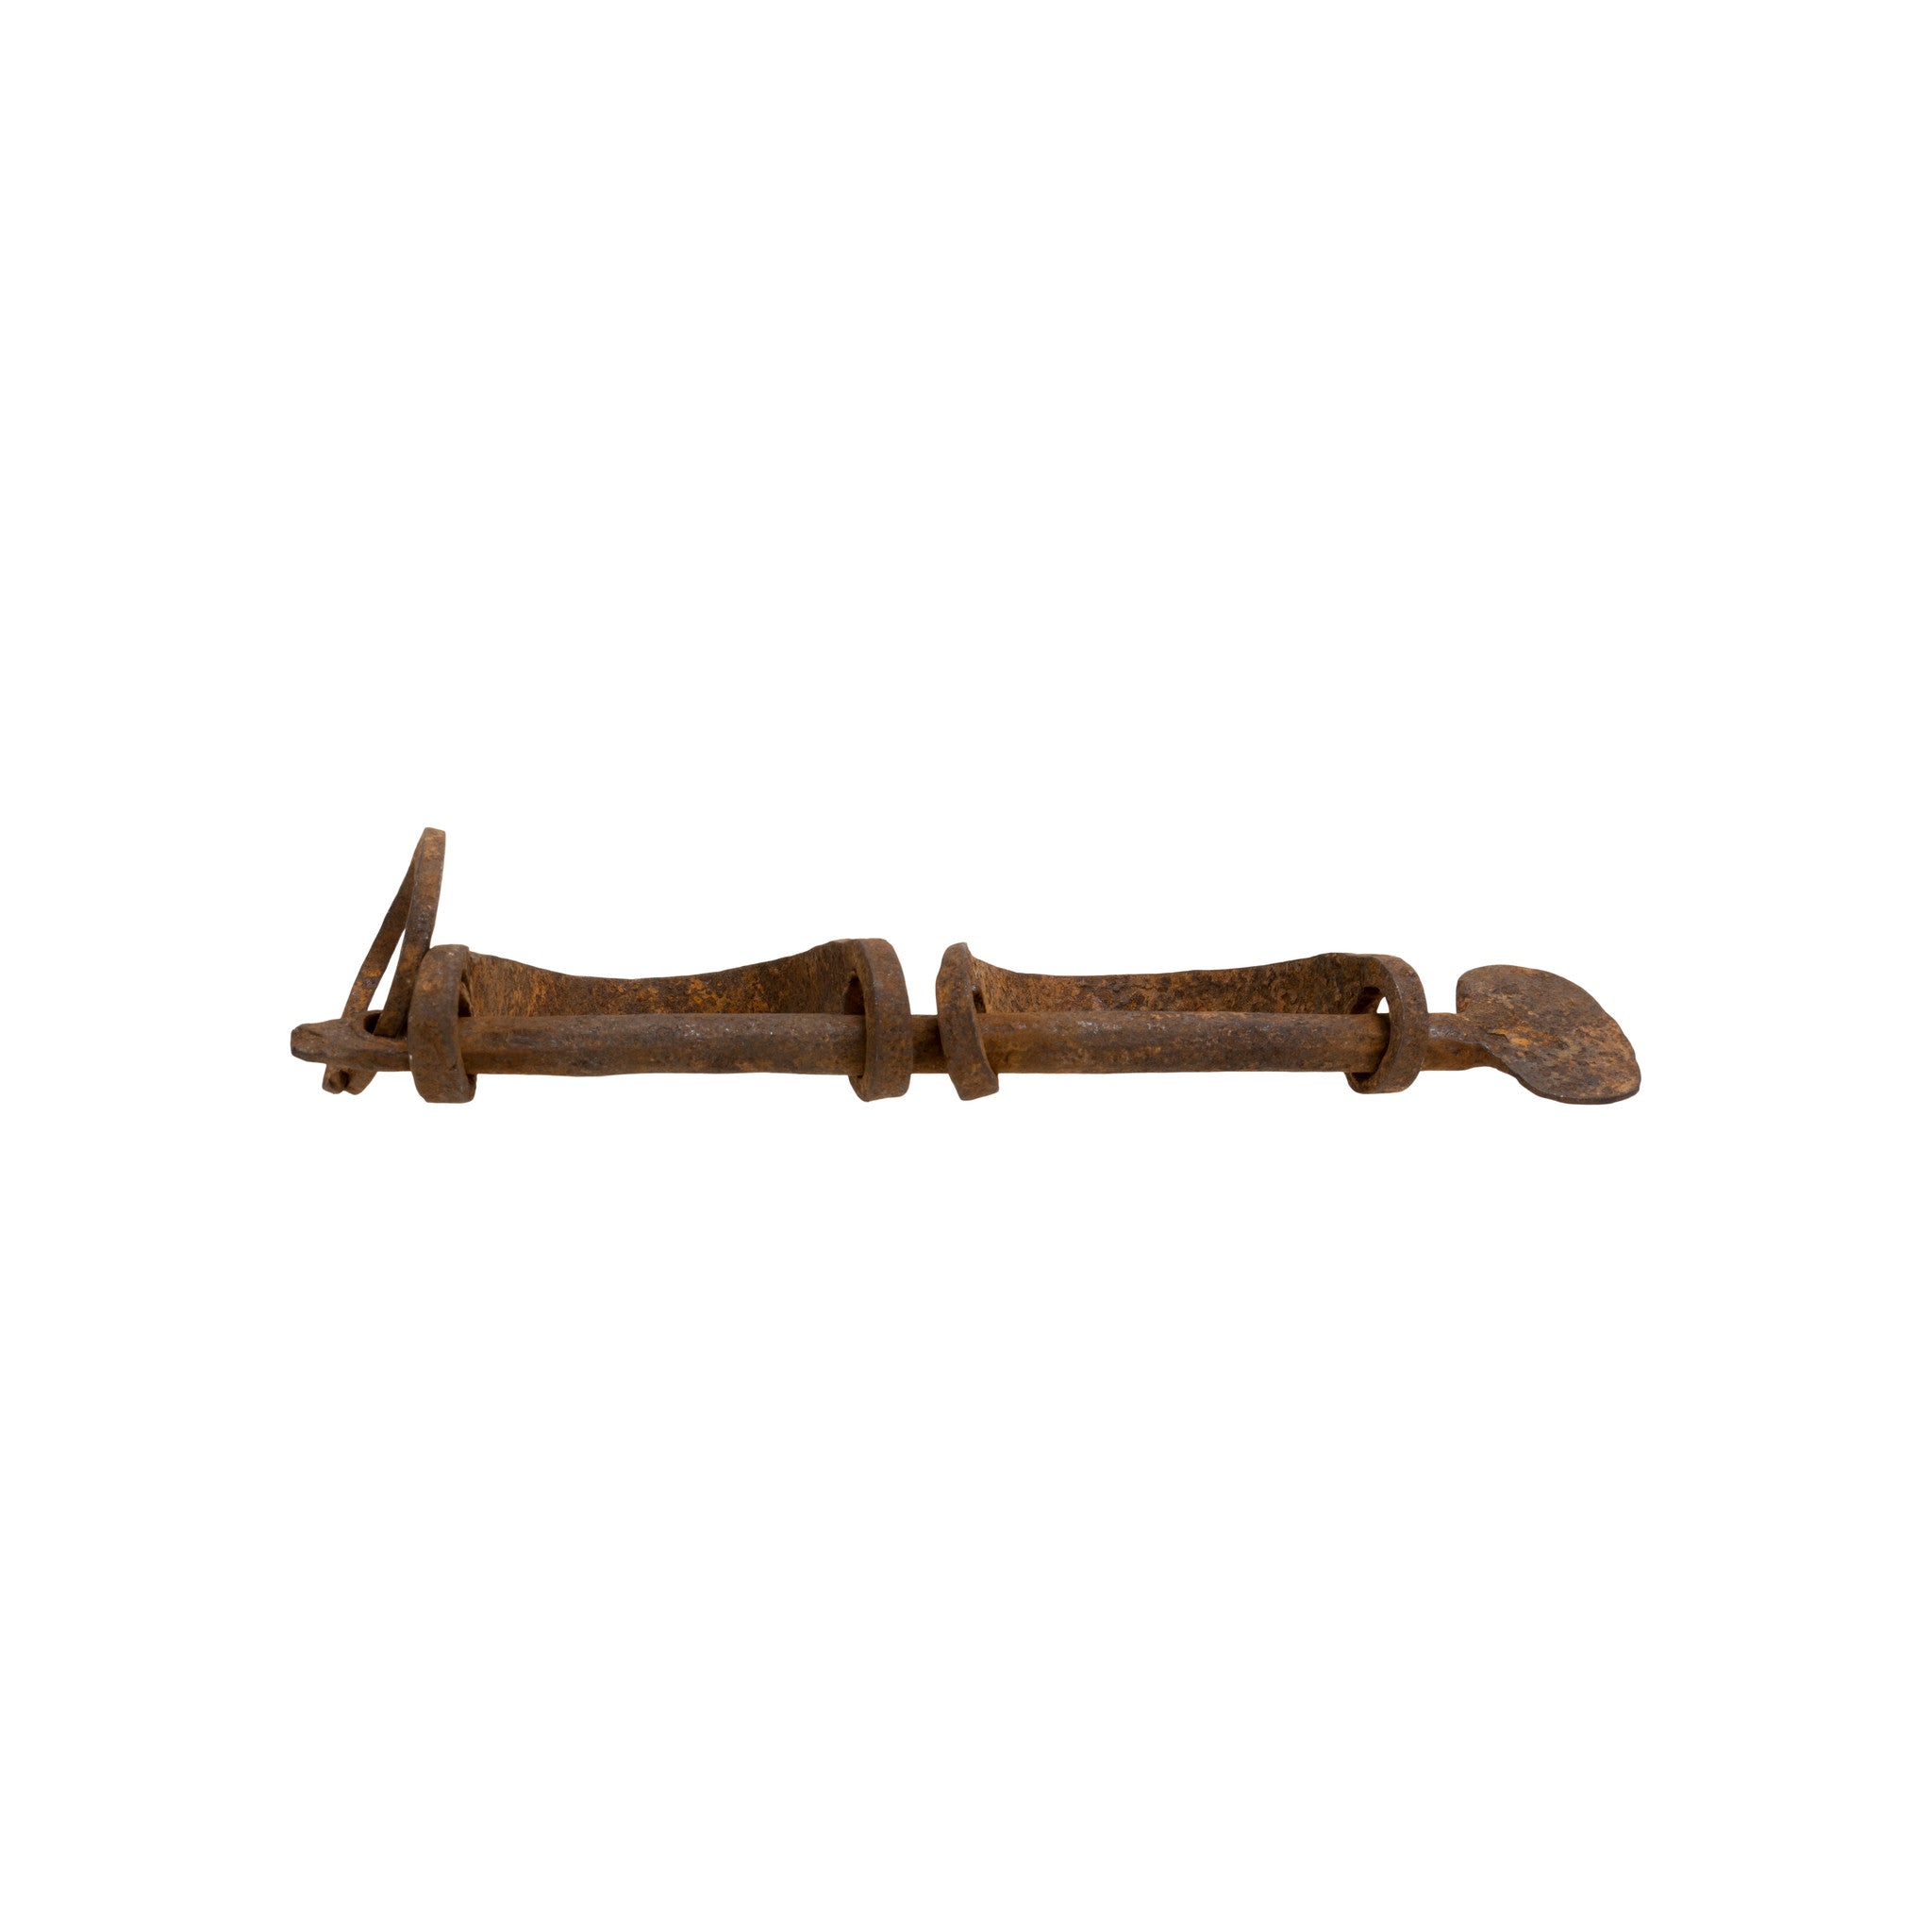 18th Century "Middle Passage" Iron Slave Shackles